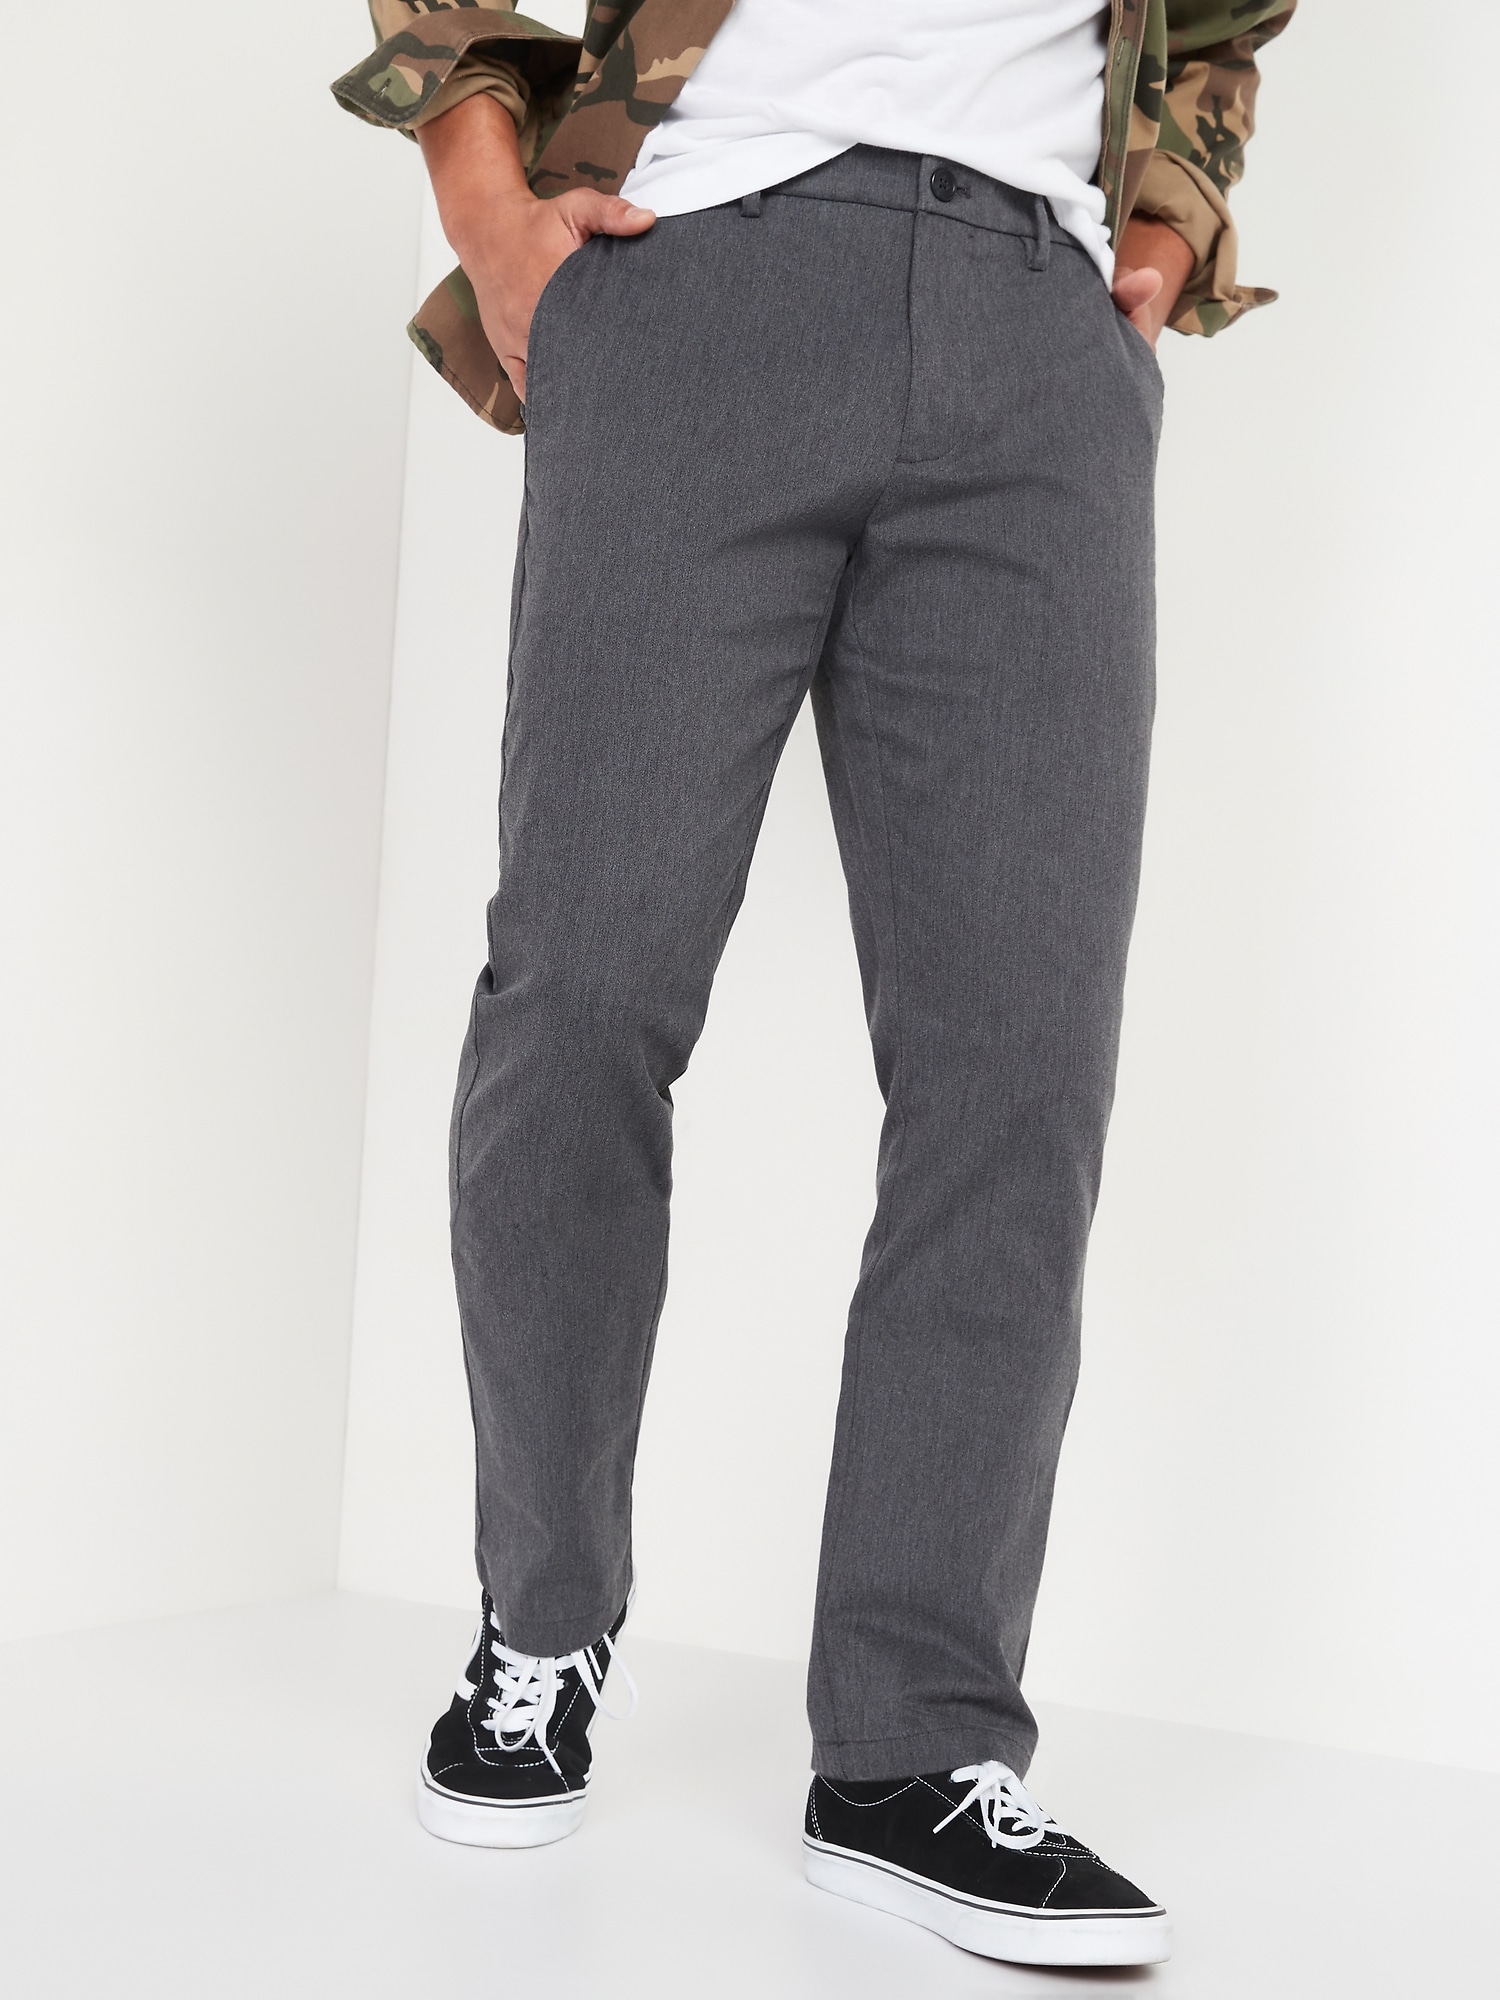 Straight Ultimate Built-In Flex Chino Pants